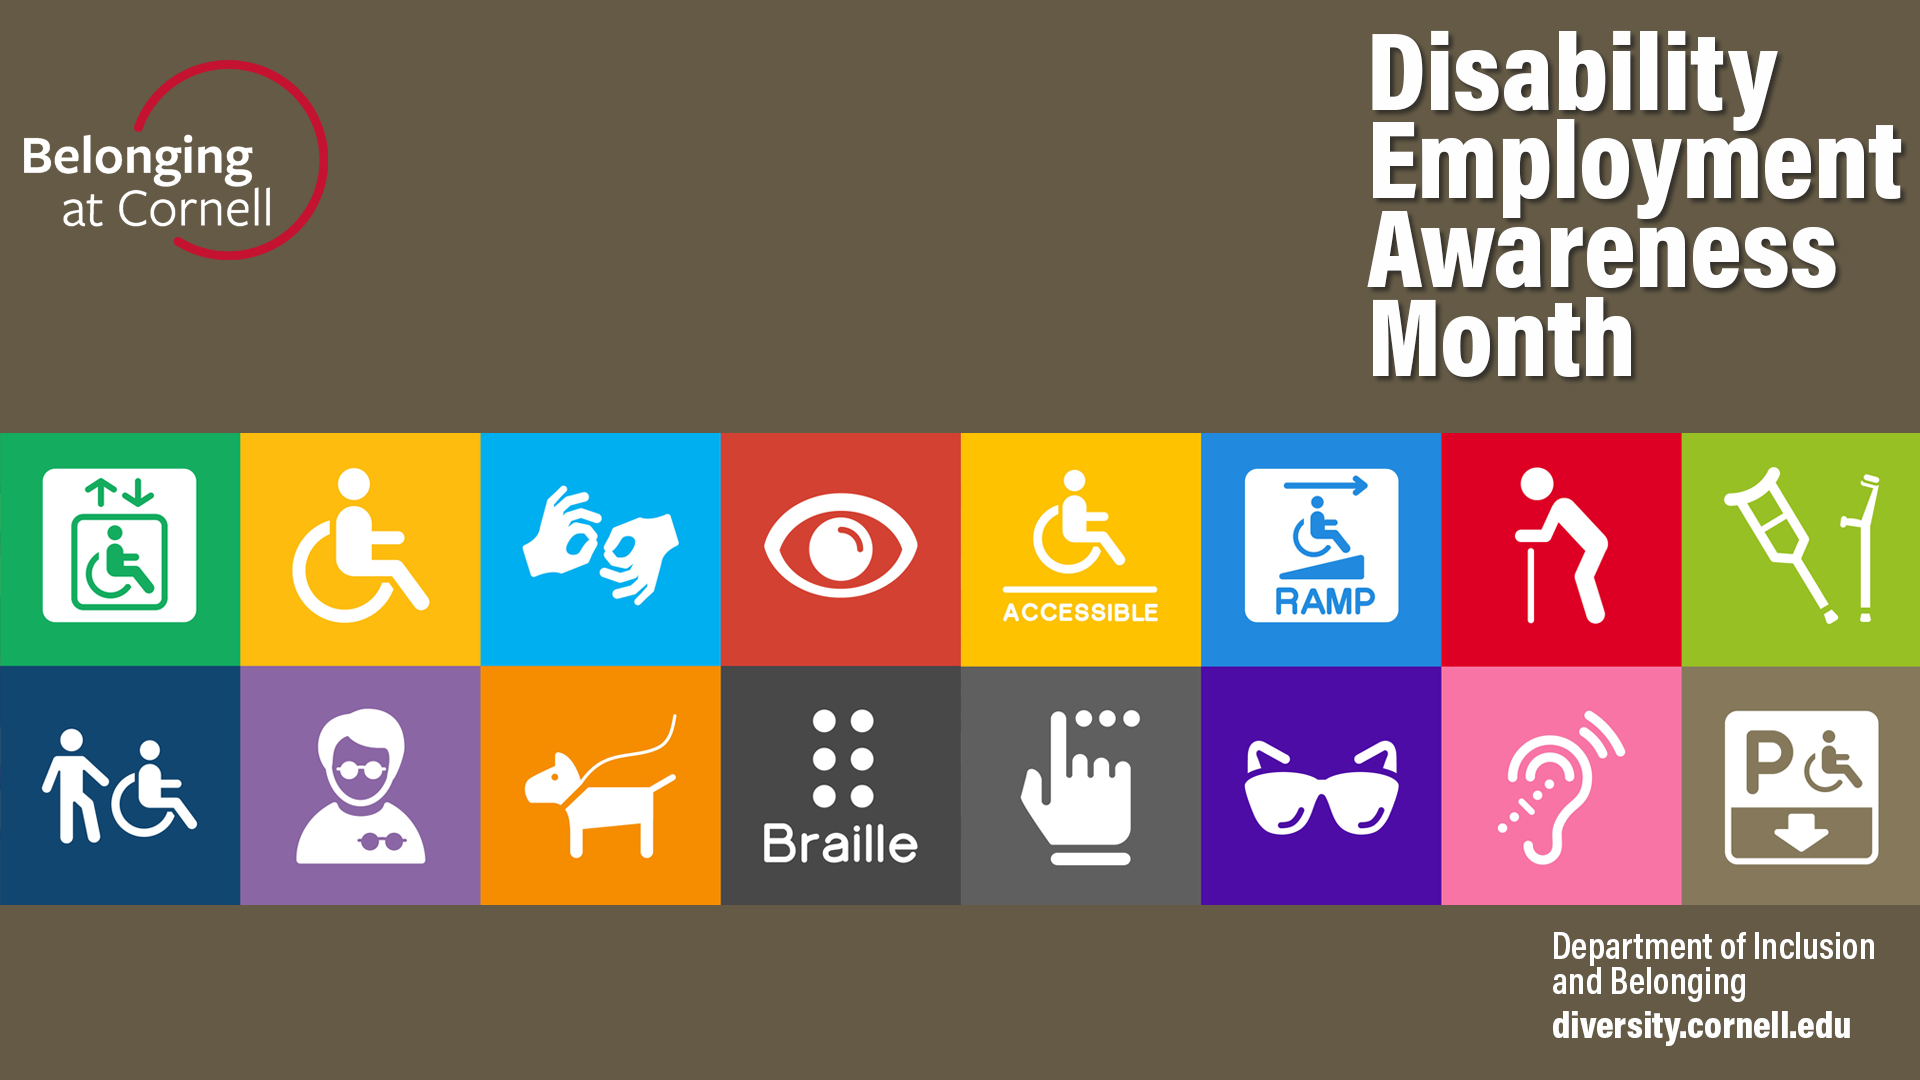 Zoom background in honor of National Disability Employment Awareness Month